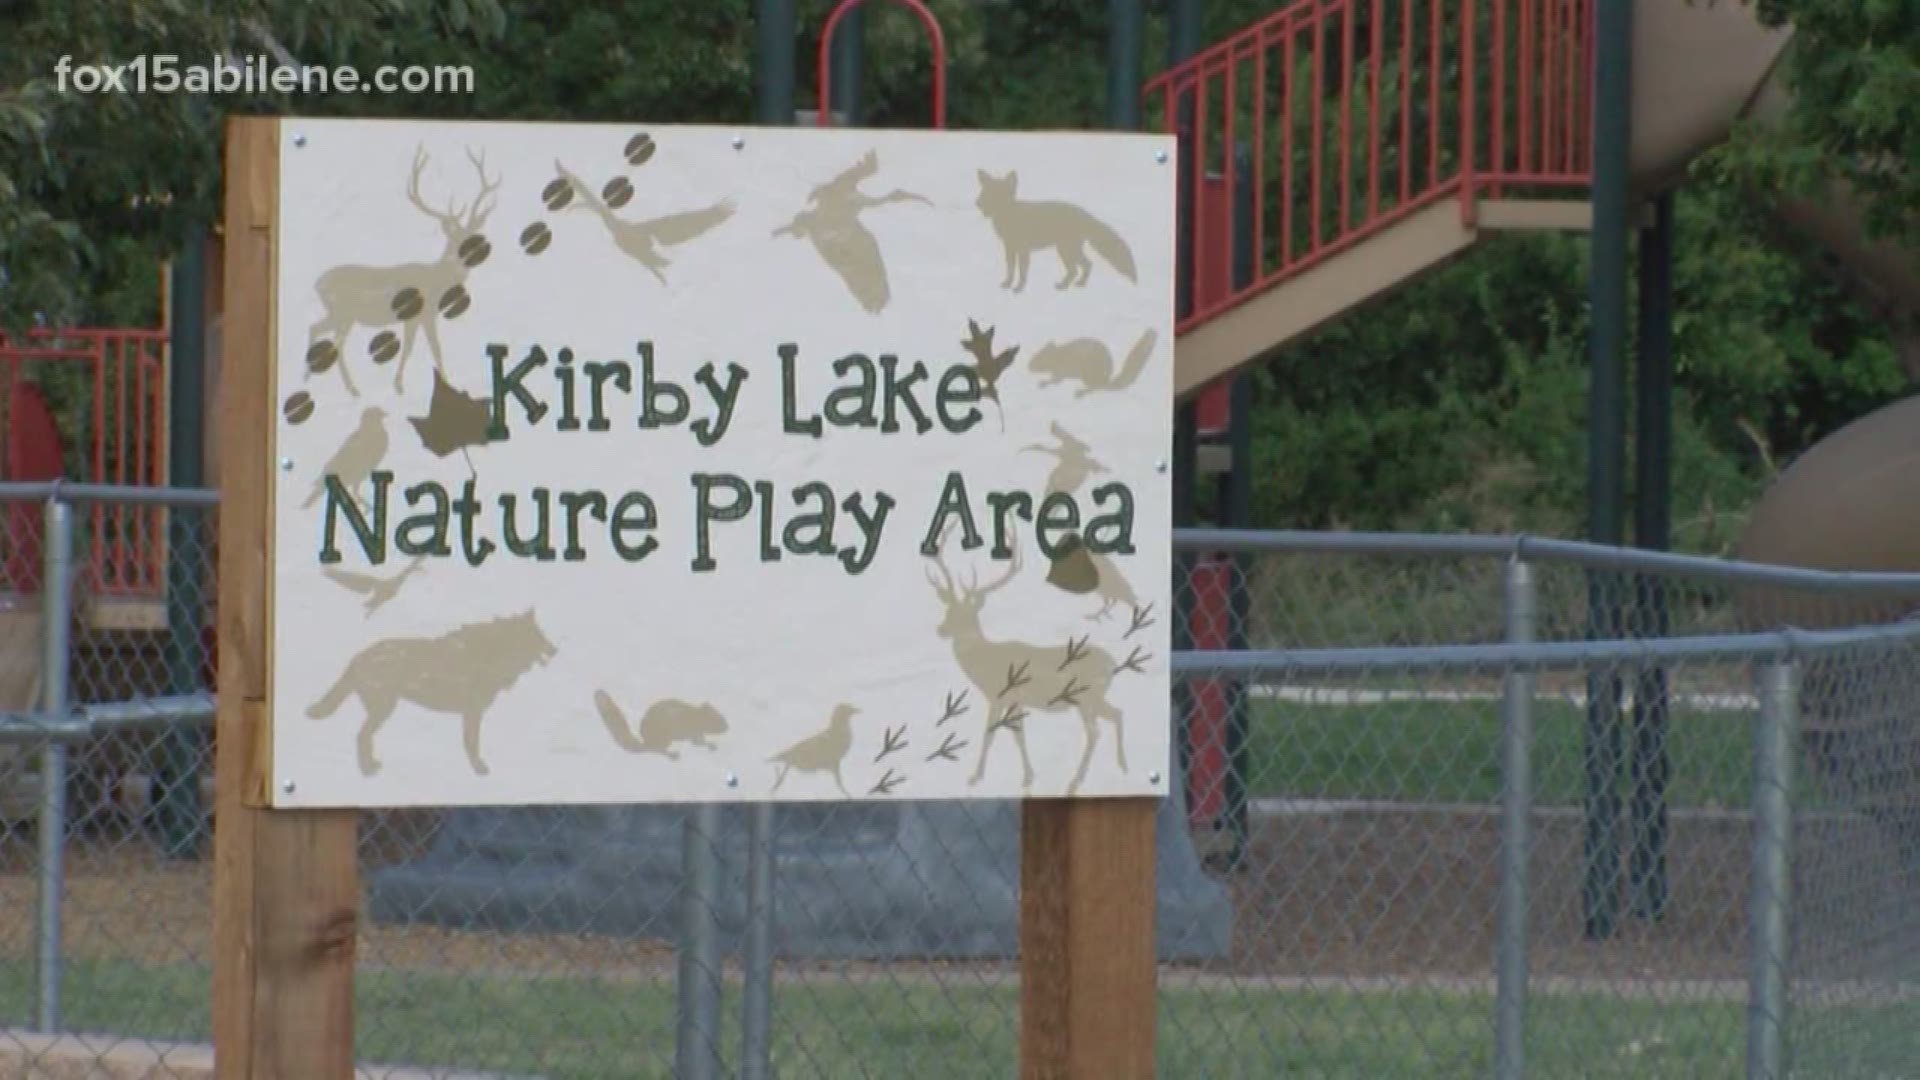 The city of Abilene is working on getting more grants to help fund other expansions of Kirby Lake.